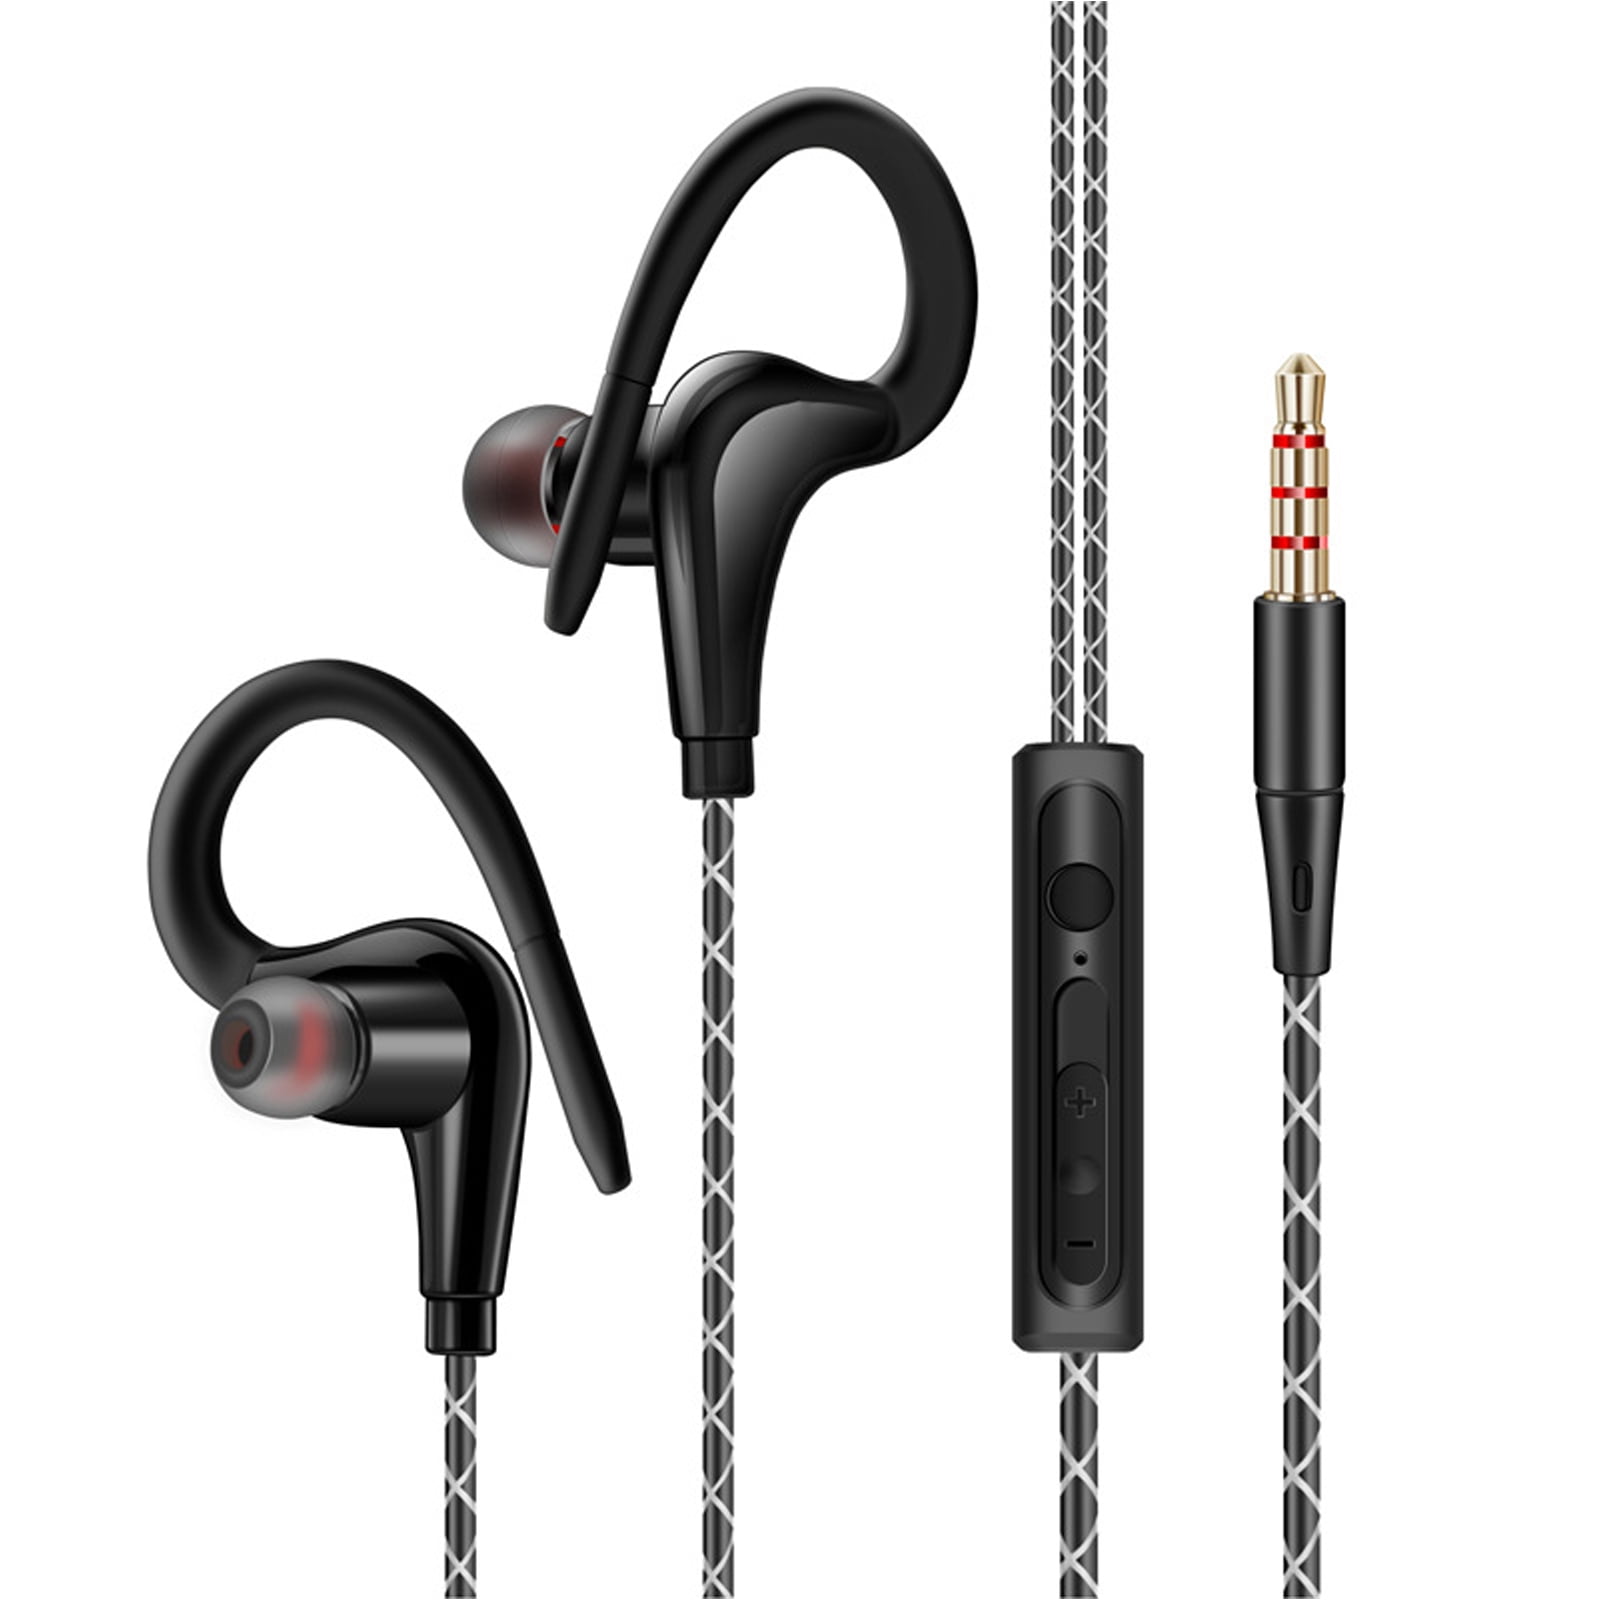 TSV In-Ear Wired Sport Running Earphone Earbuds with Microphone, Over Ear Hook Headphone 3.5mm, Sweatproof Running Earphones for Workout Exercise Gym Compatible with iPhone, Cell Phones, Tablets, PC